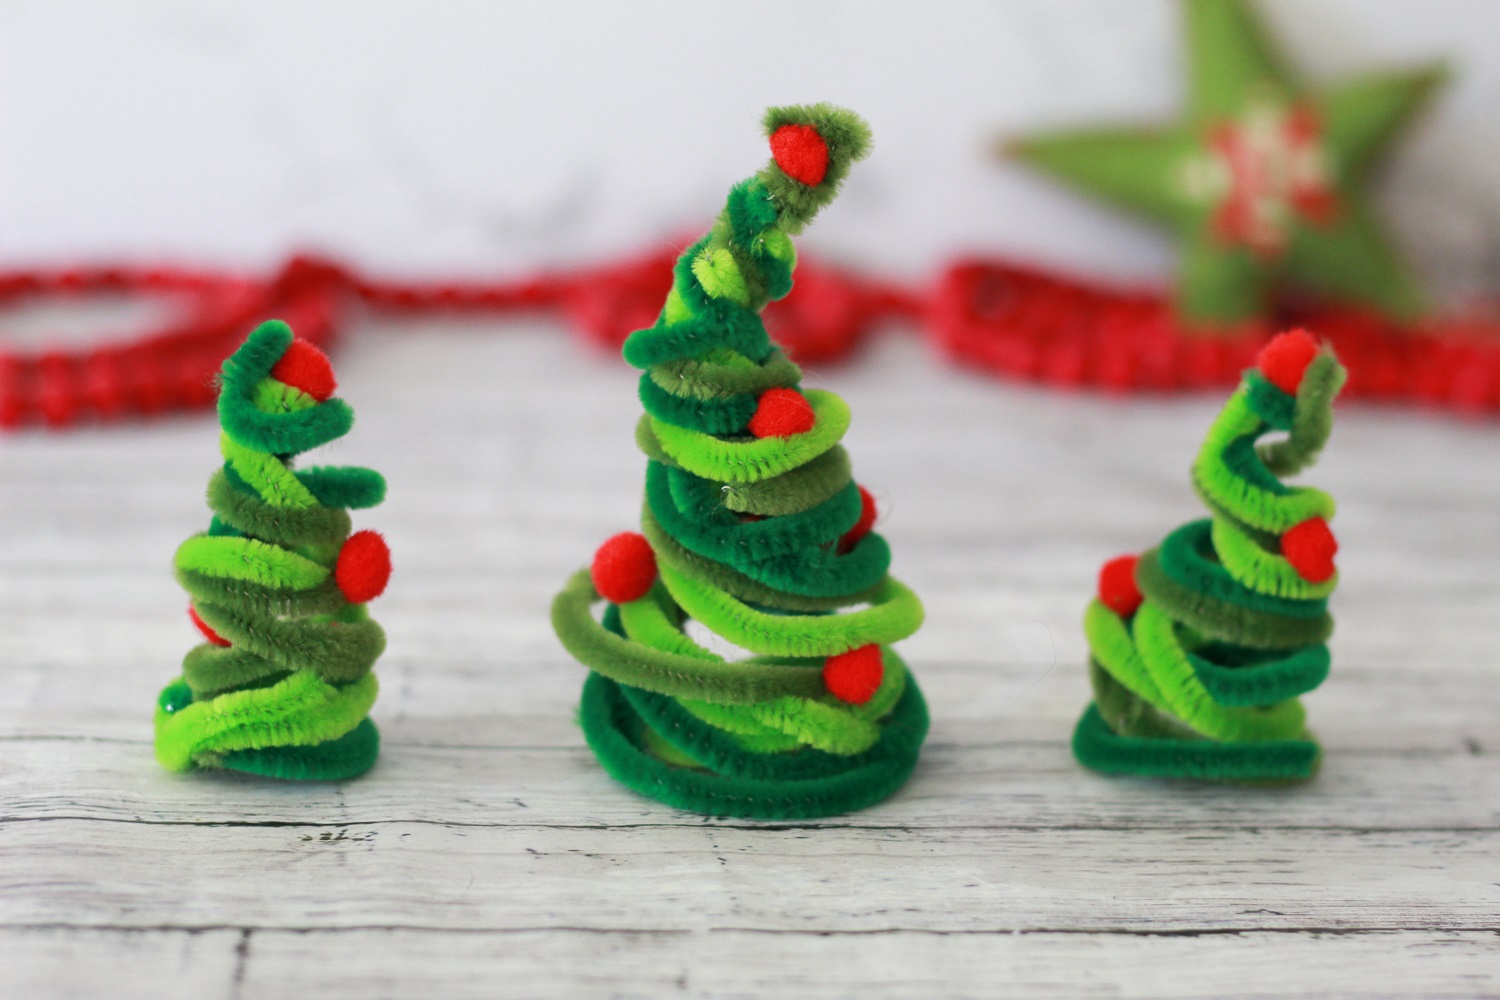 Pipe cleaner Christmas trees from Two Kids and a Coupon.